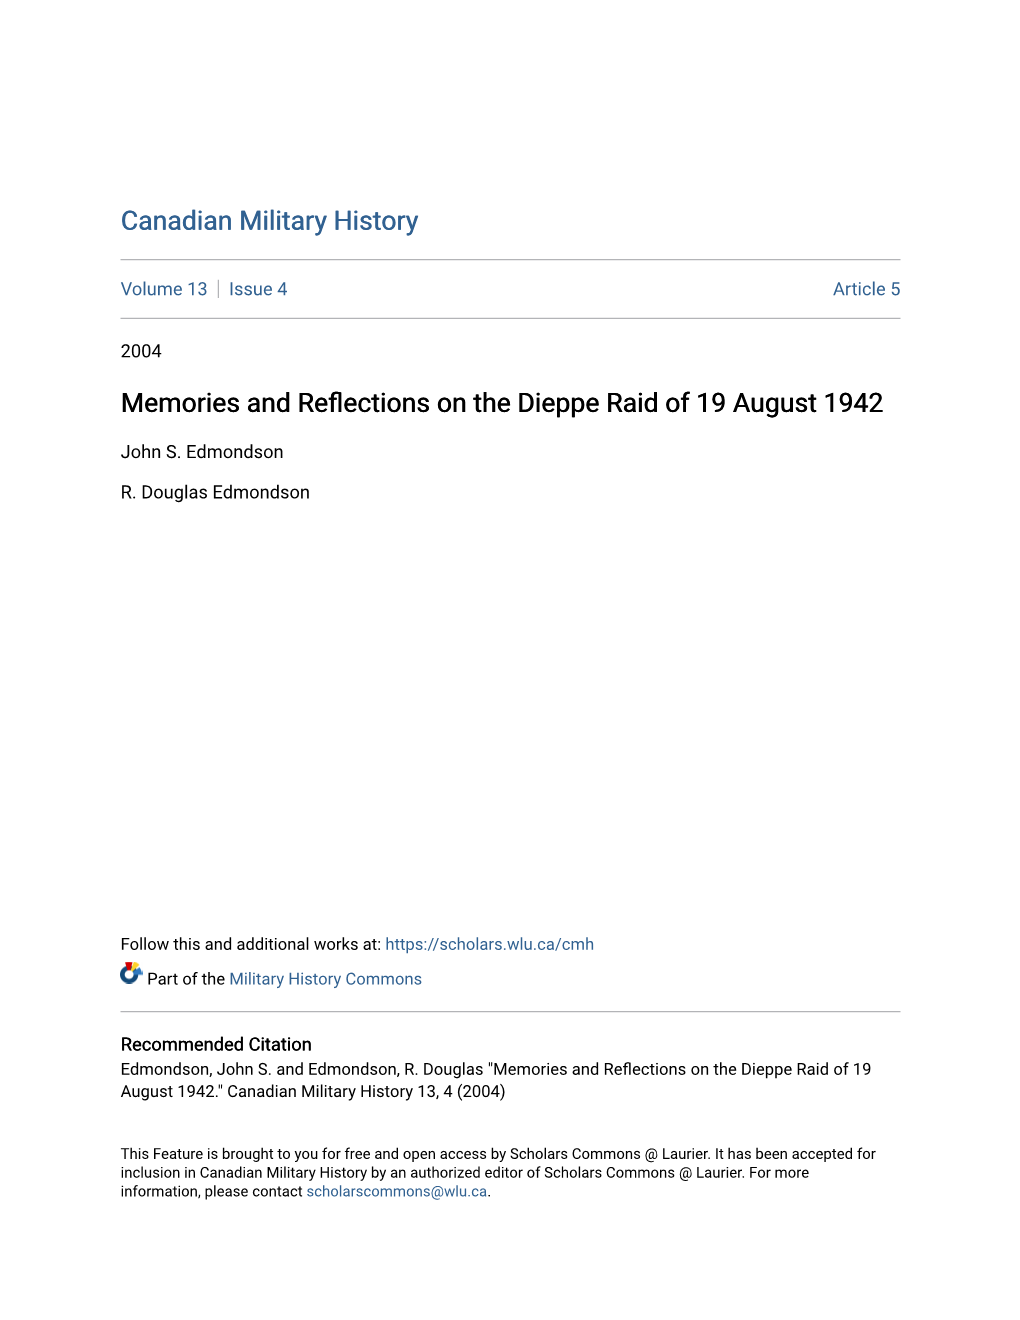 Memories and Reflections on the Dieppe Raid of 19 August 1942." Canadian Military History 13, 4 (2004)